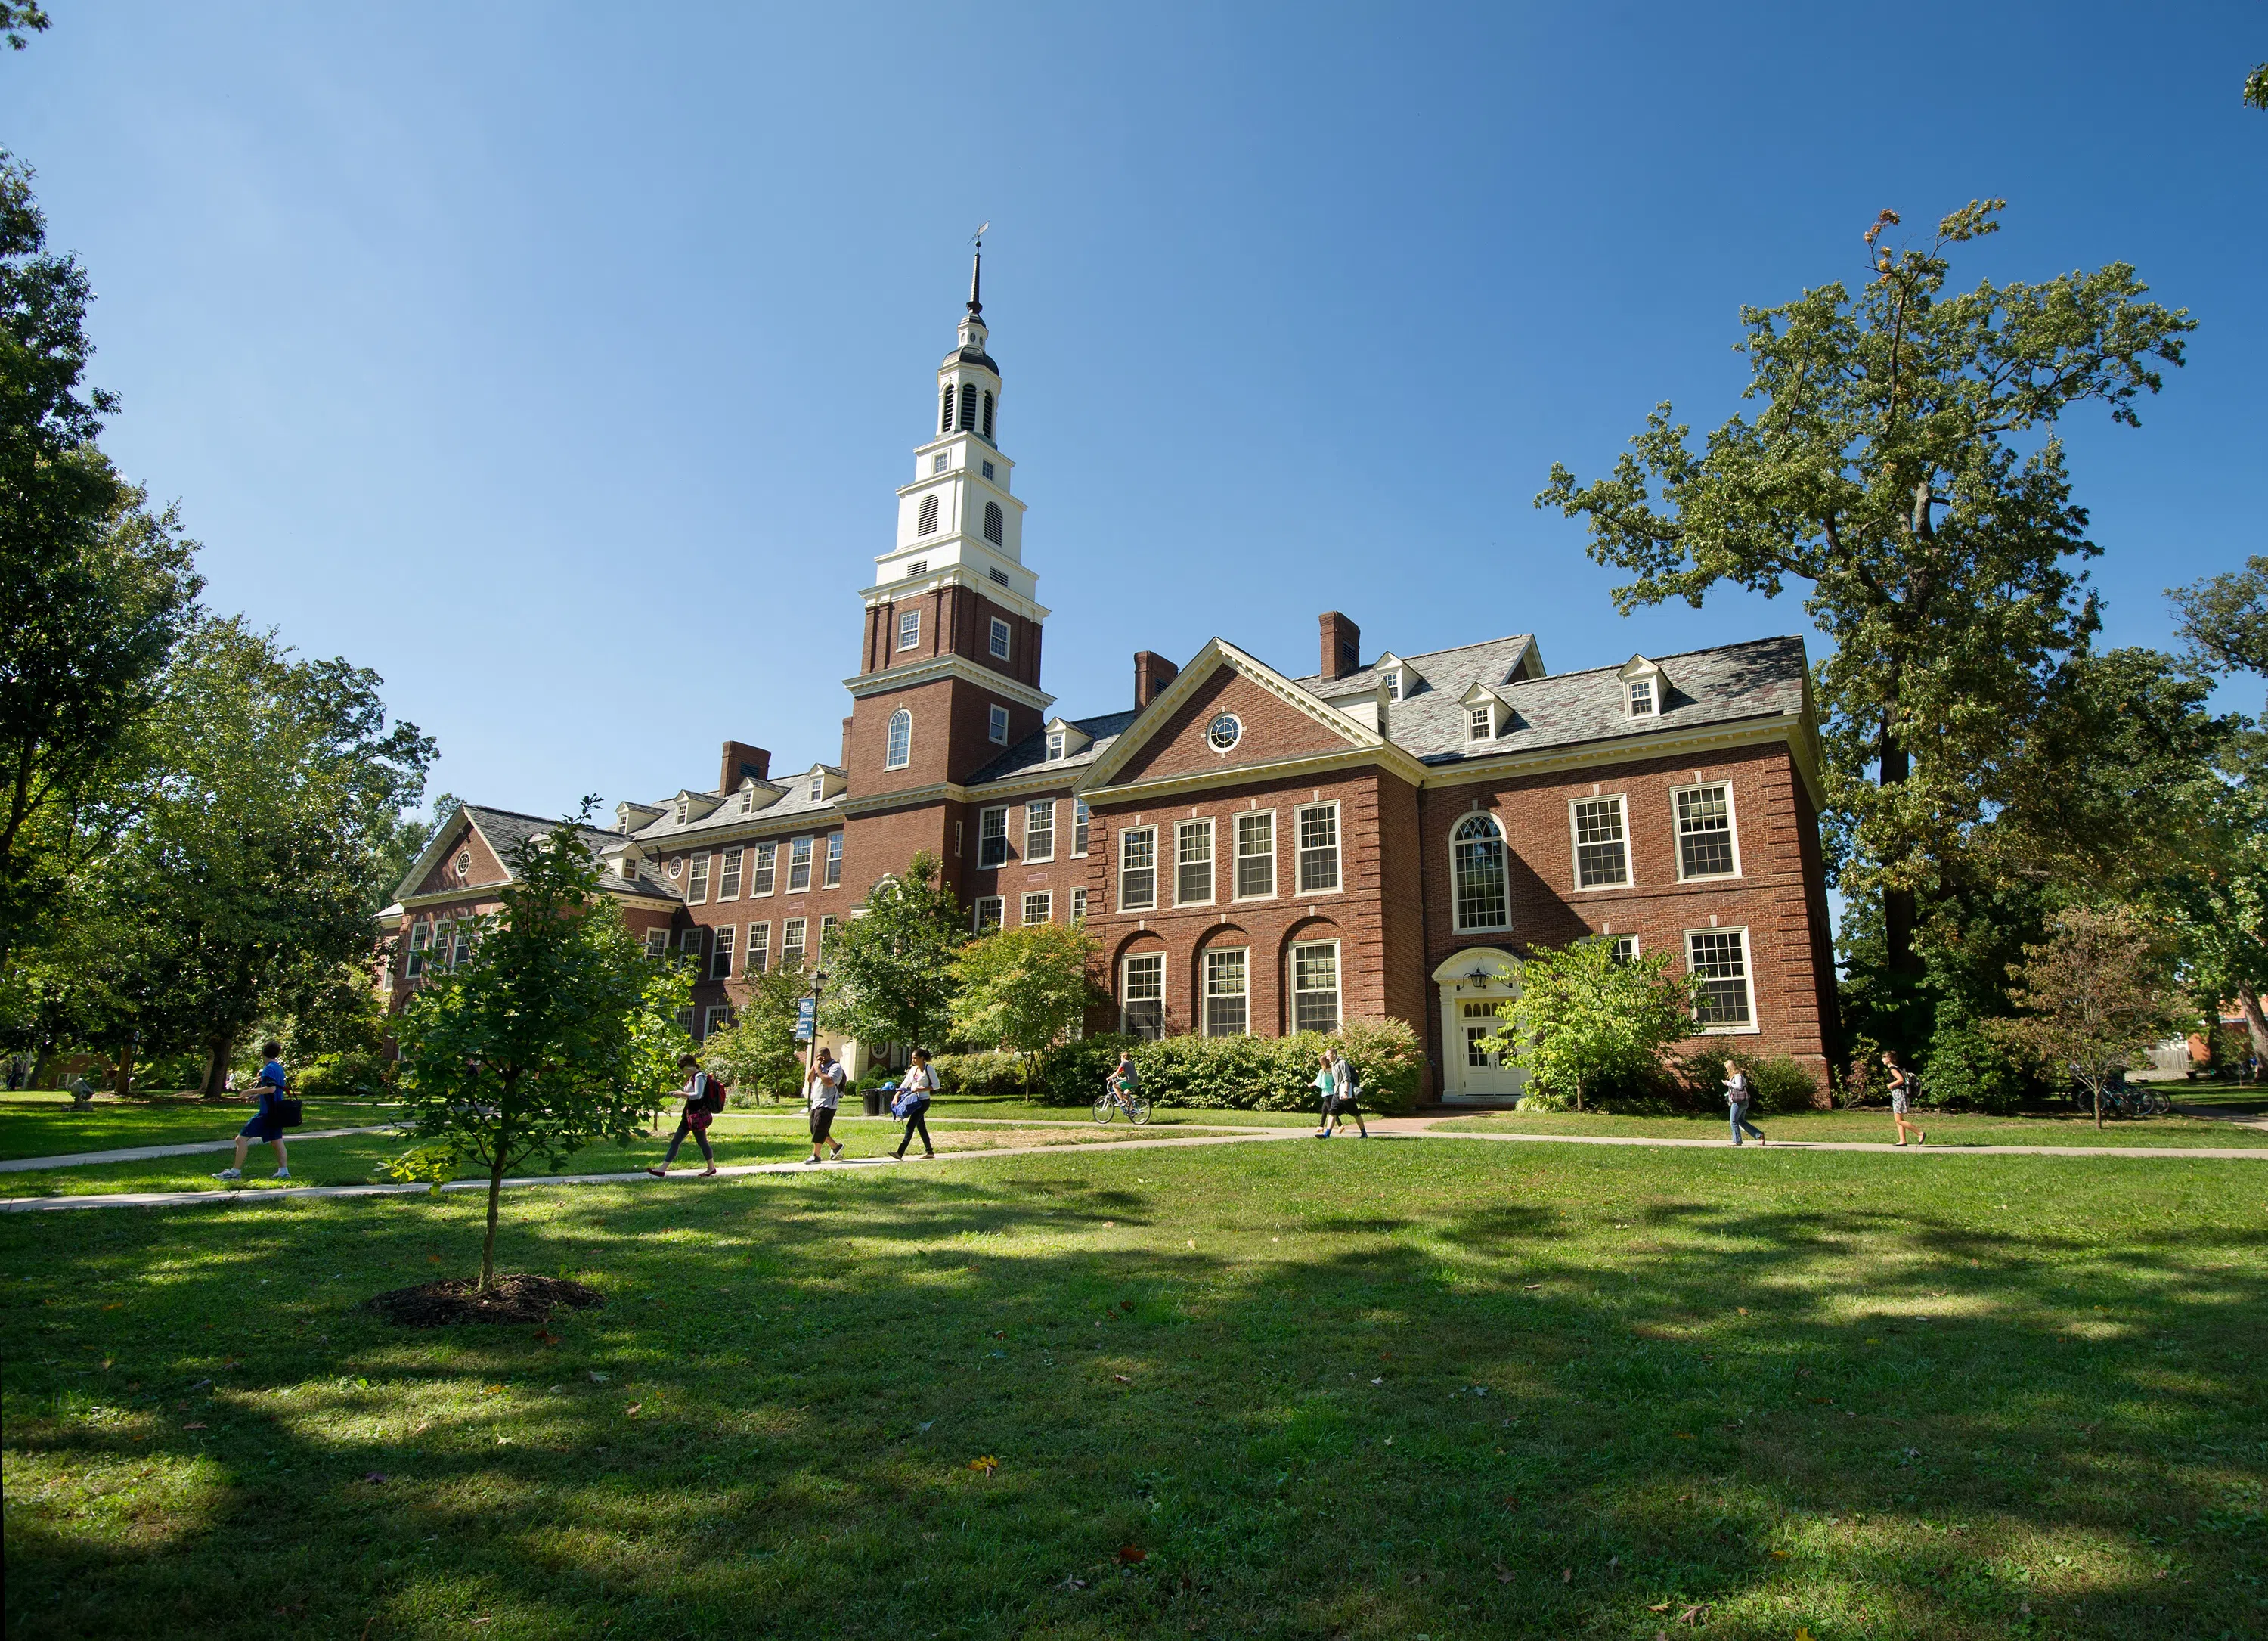 Exterior photo of large red brick academic building reminiscent of Philadelphia's Independence Hall.